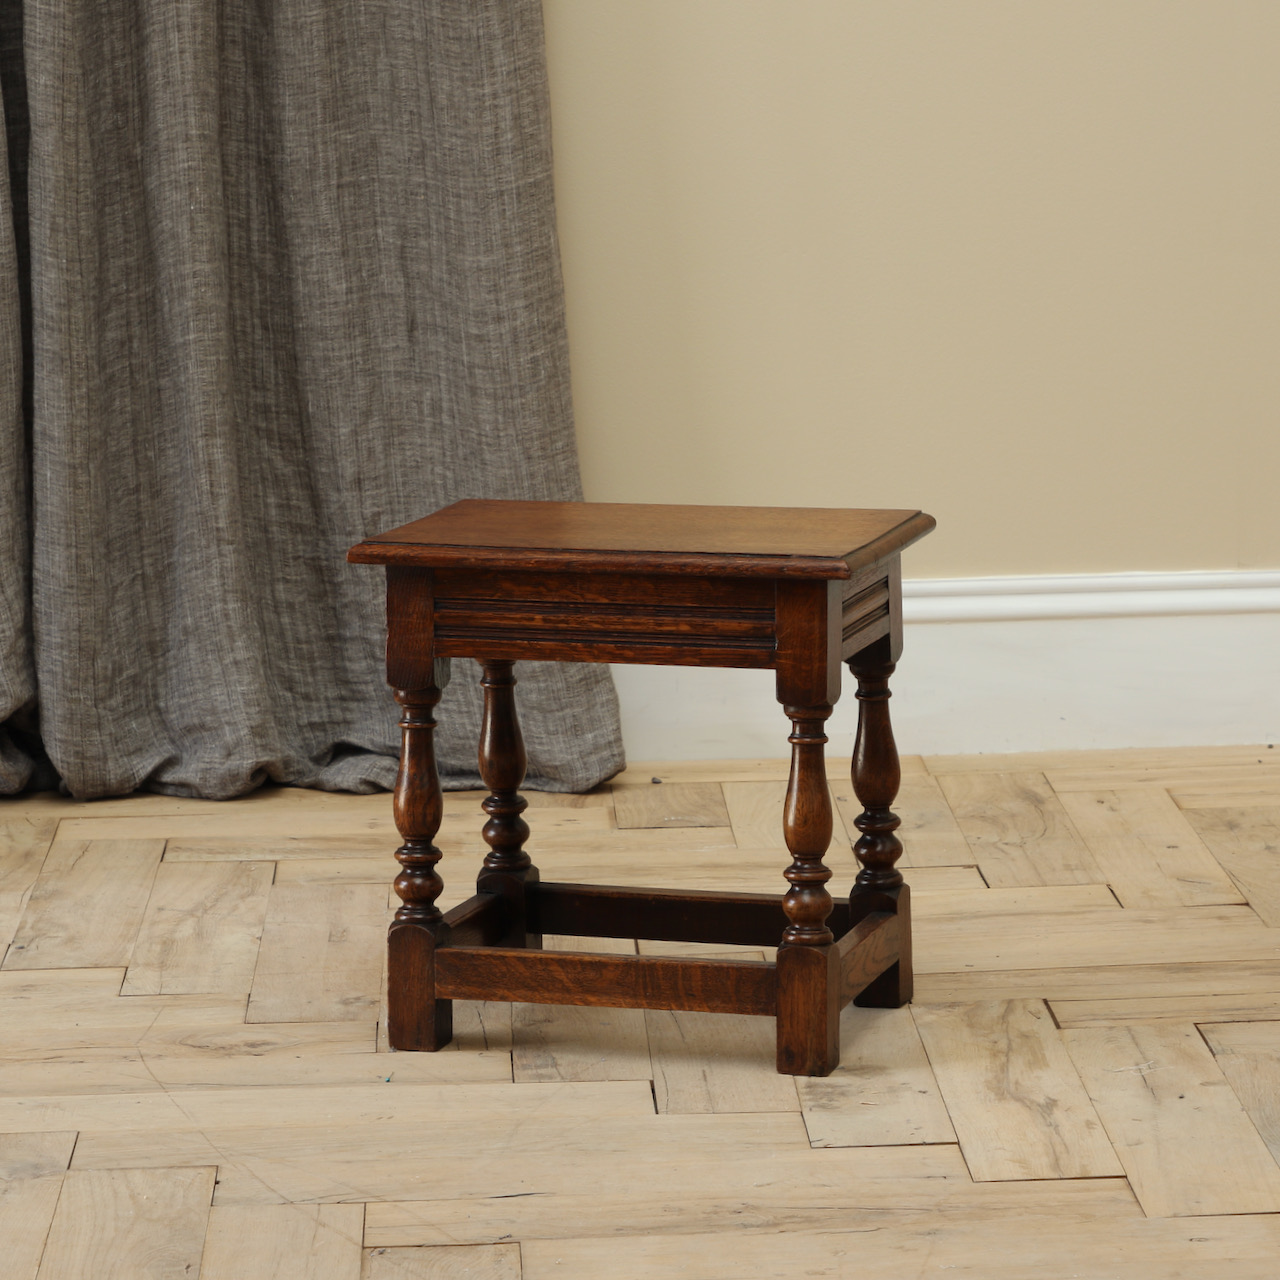 131-96 - Jointed Stool